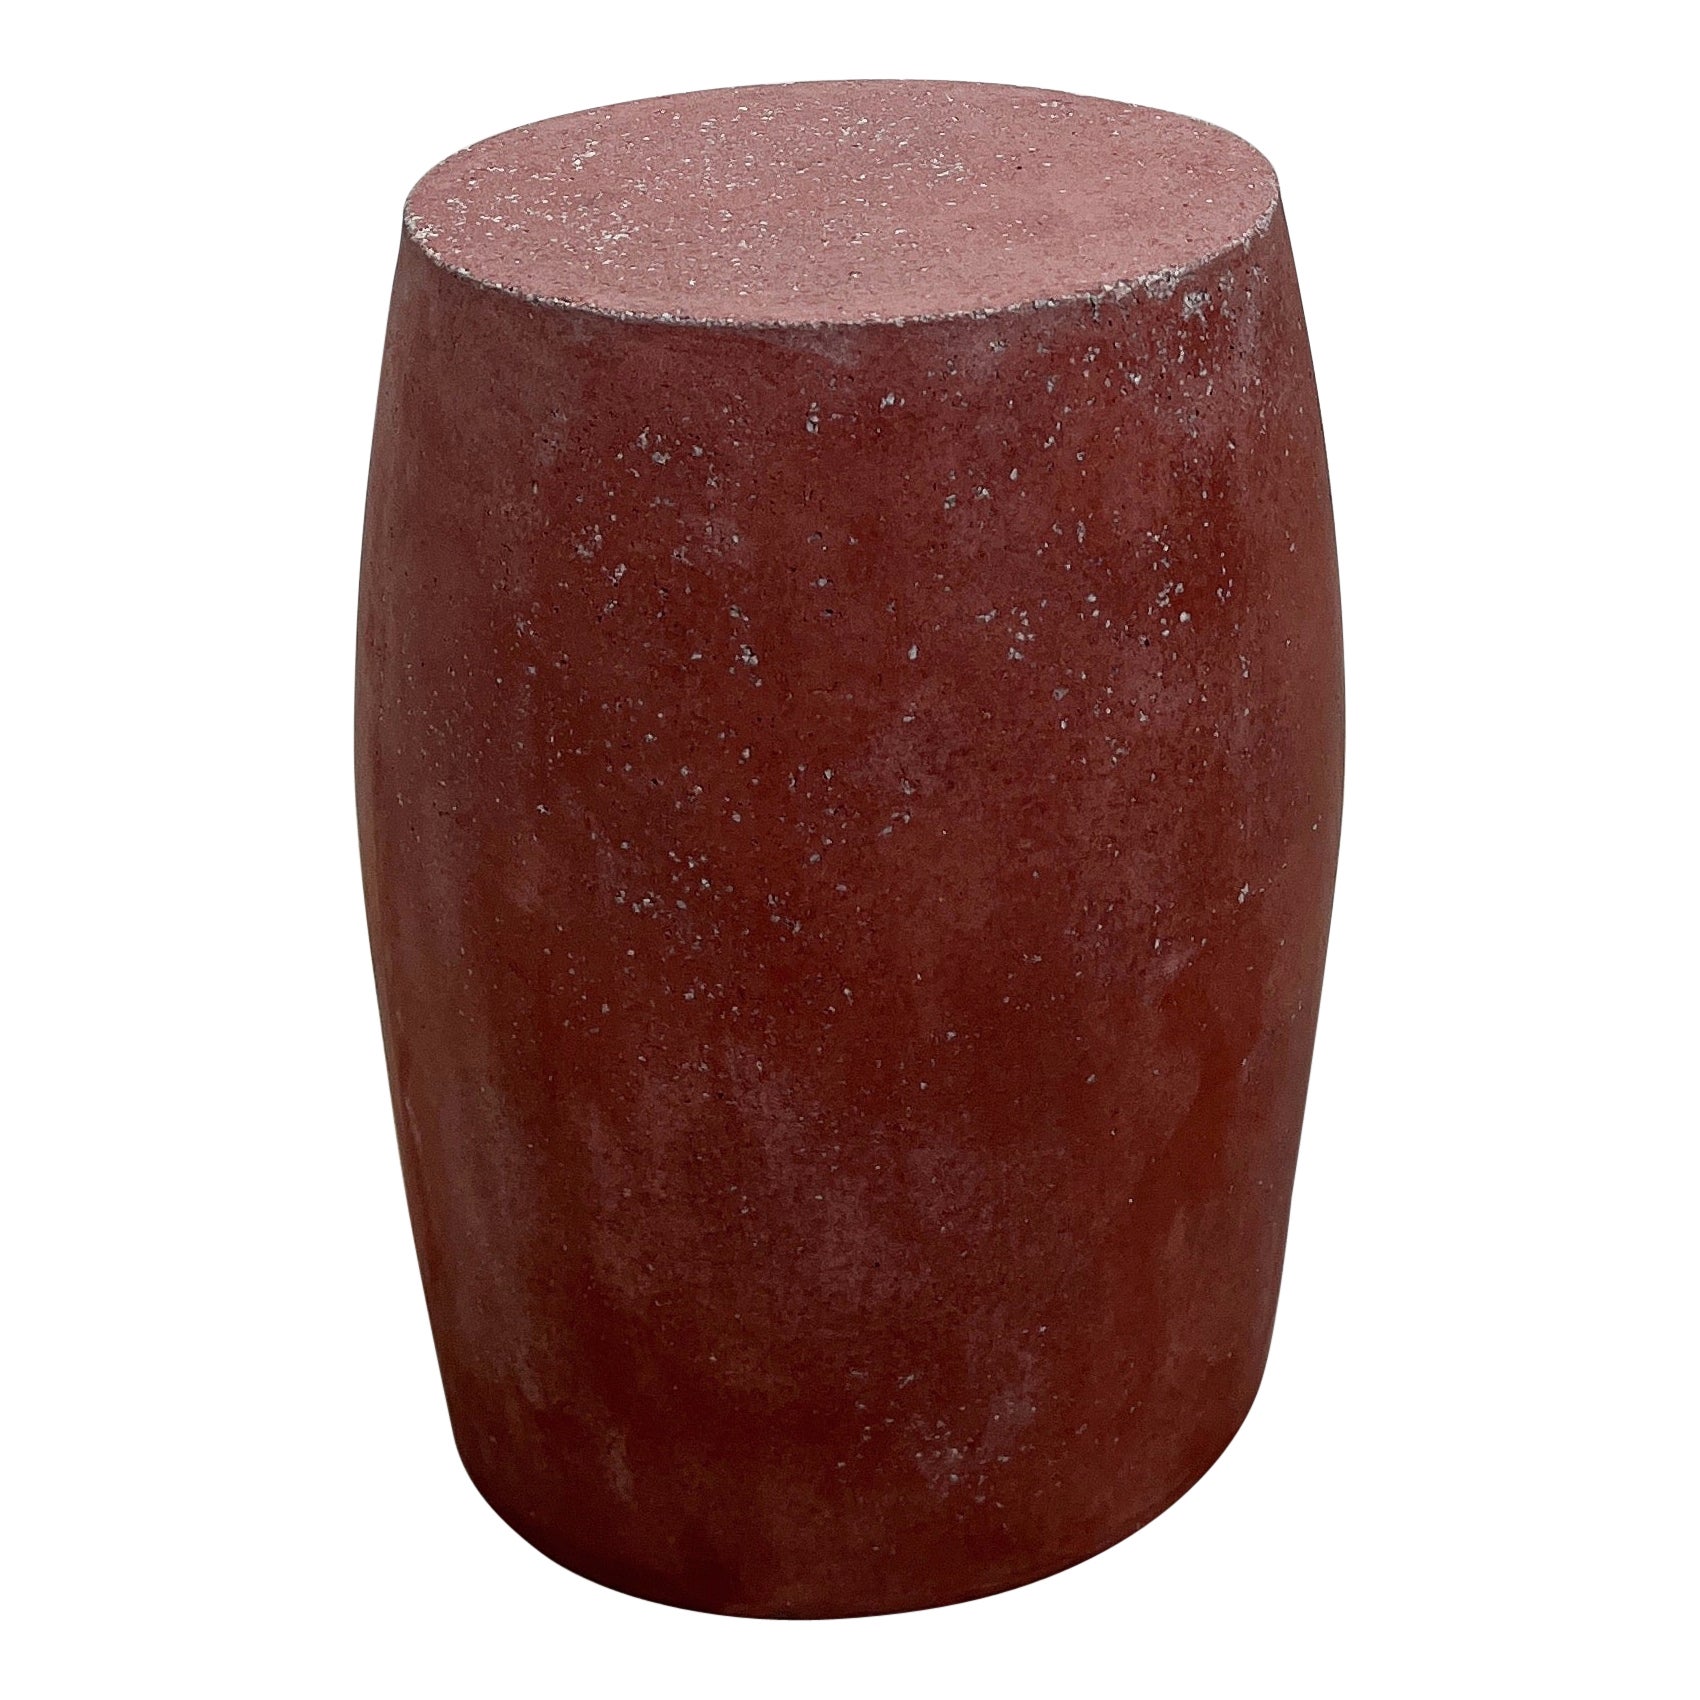 Cast Resin 'Barrel' Side Table, Sedona Red Finish by Zachary A. Design For Sale